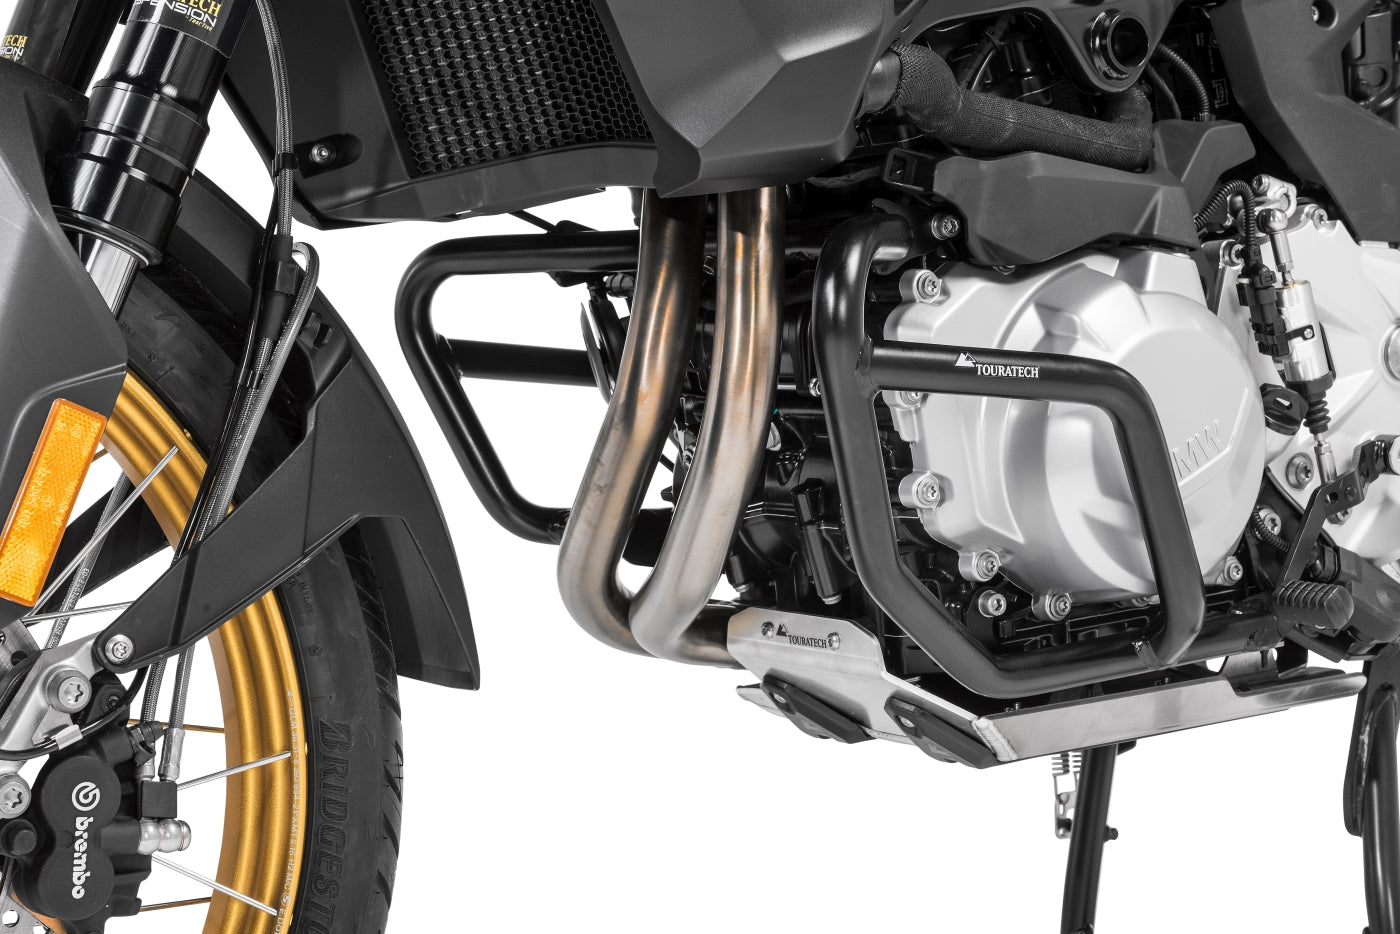 Engine crash bar stainless steel, black for BMW F850GS / F750GS